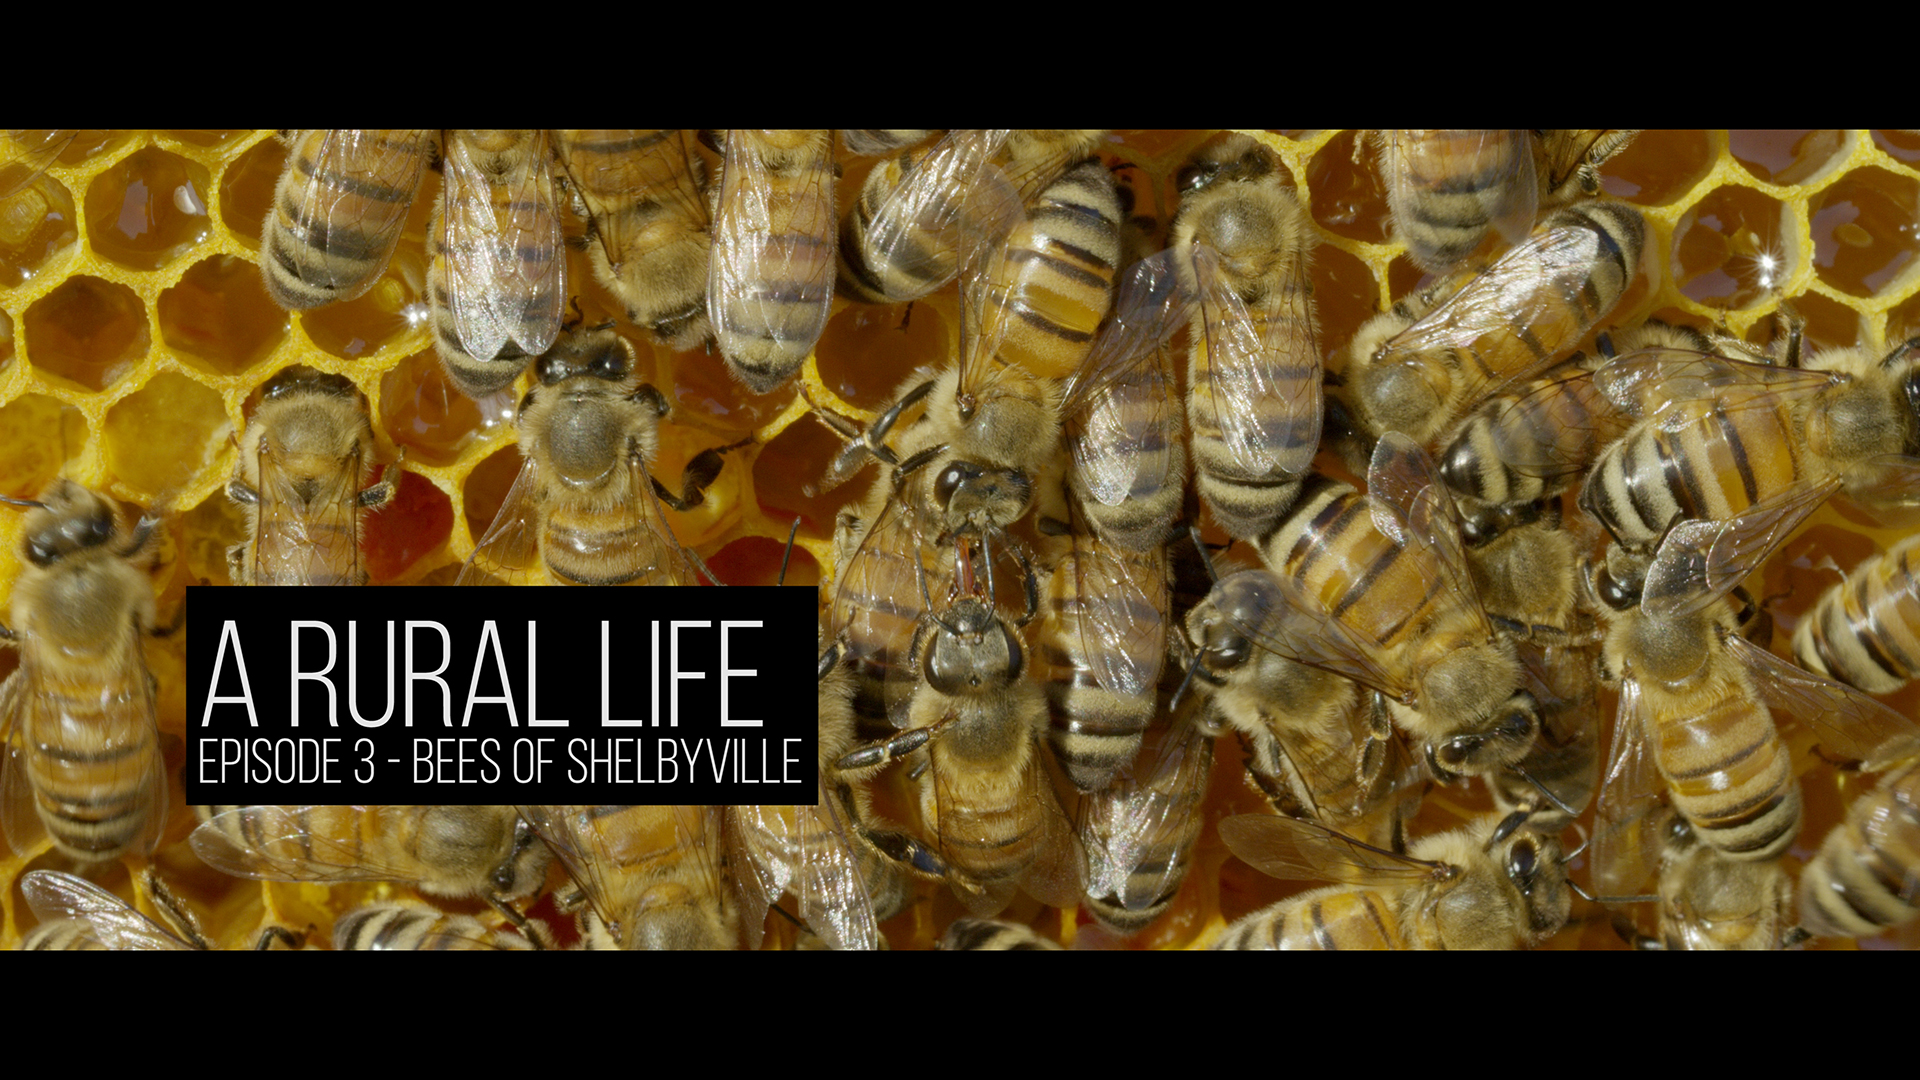 A Rural Life Episode 3 Bees of Shelbyville Poster 1080.jpg